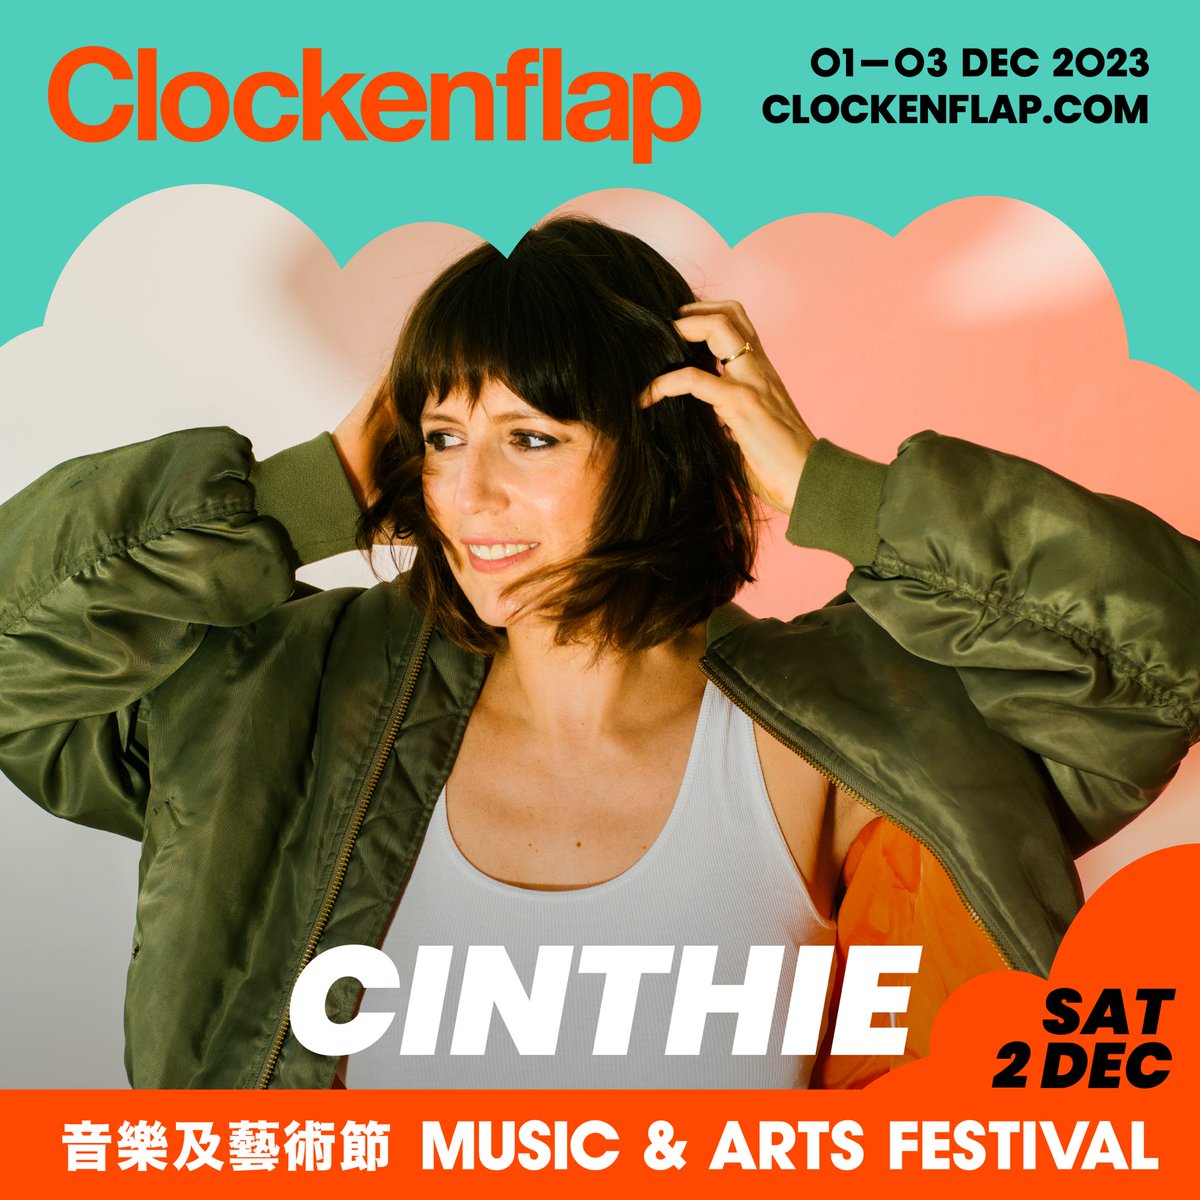 One of the most respected electronic DJ/producers to come out of Berlin in recent years, Cinthie is a prodigious talent both in the studio and behind the decks. Tickets: ticketflap.com/clockenflapdec…